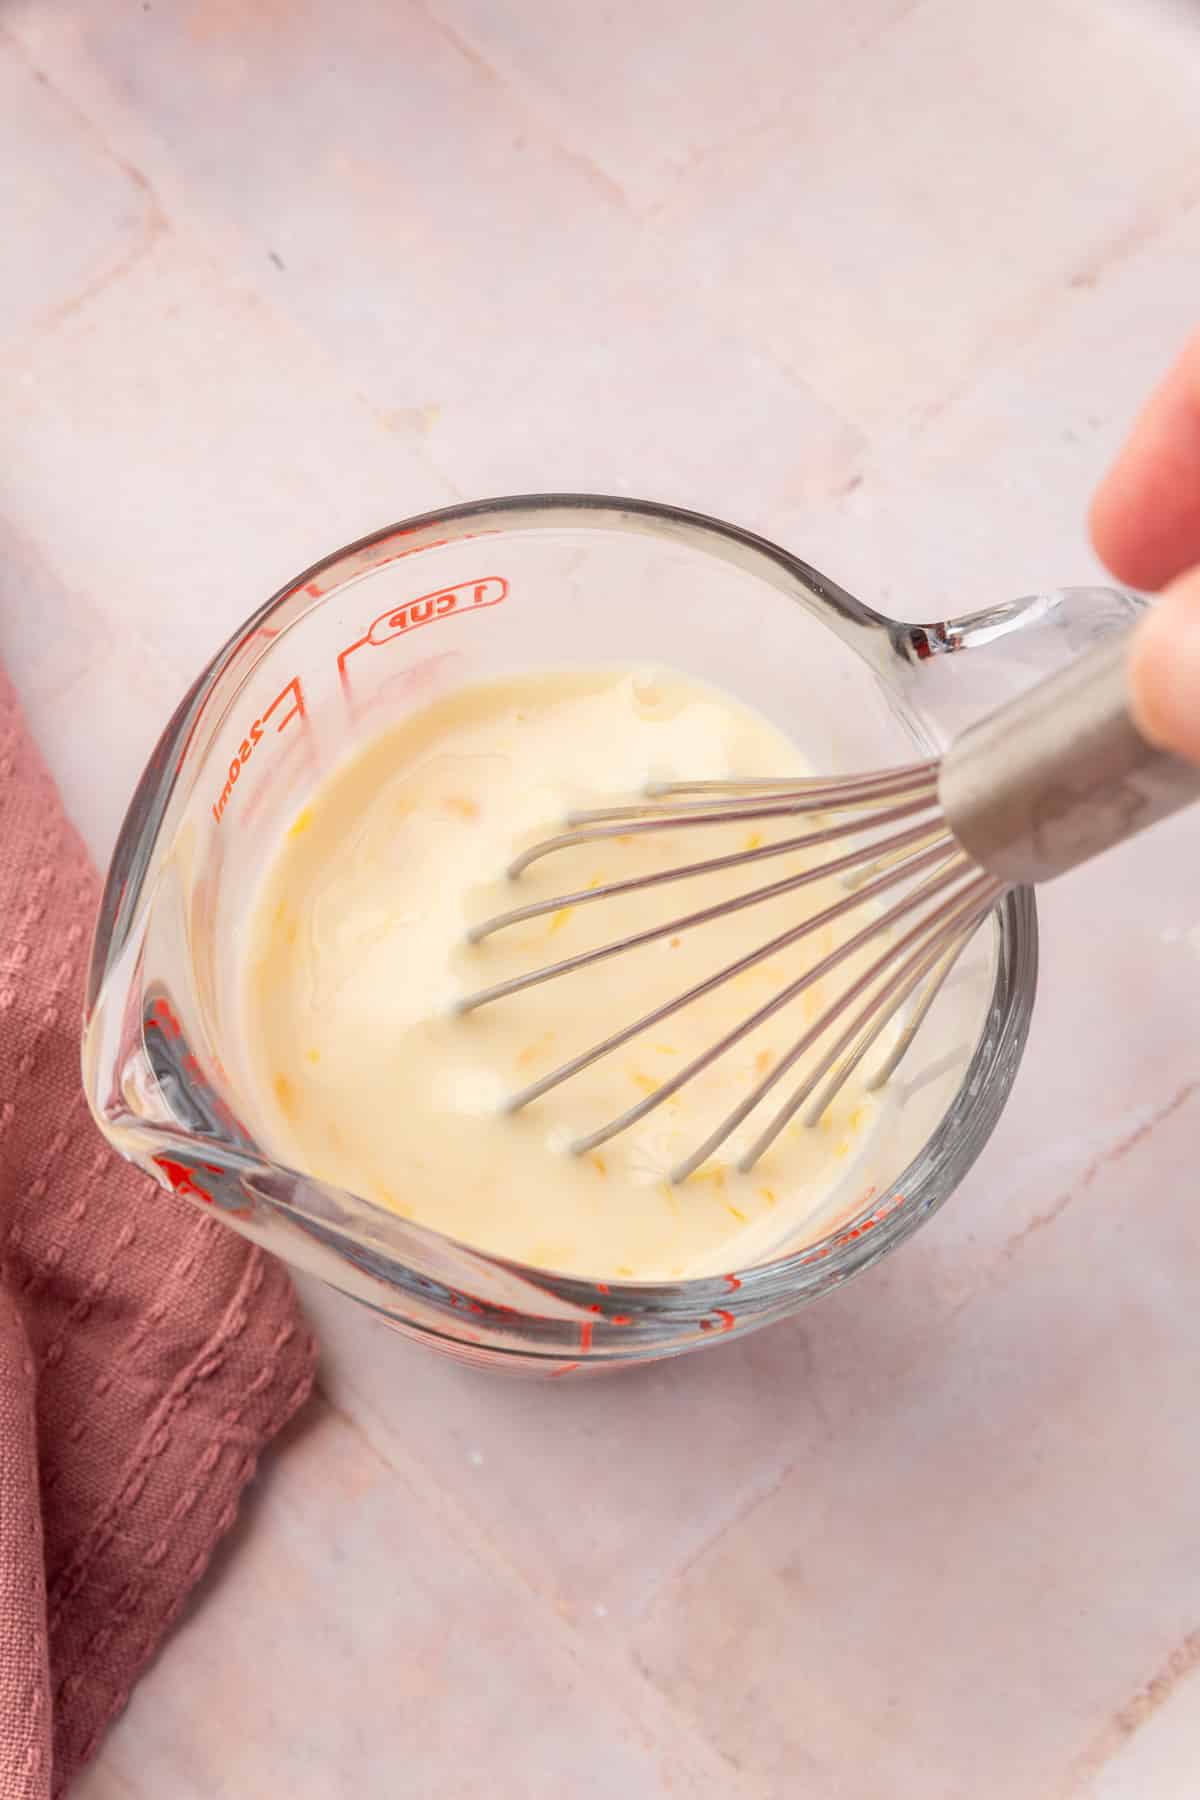 A whisk mixing together a buttermilk and egg mixture in a glass measuring cup.